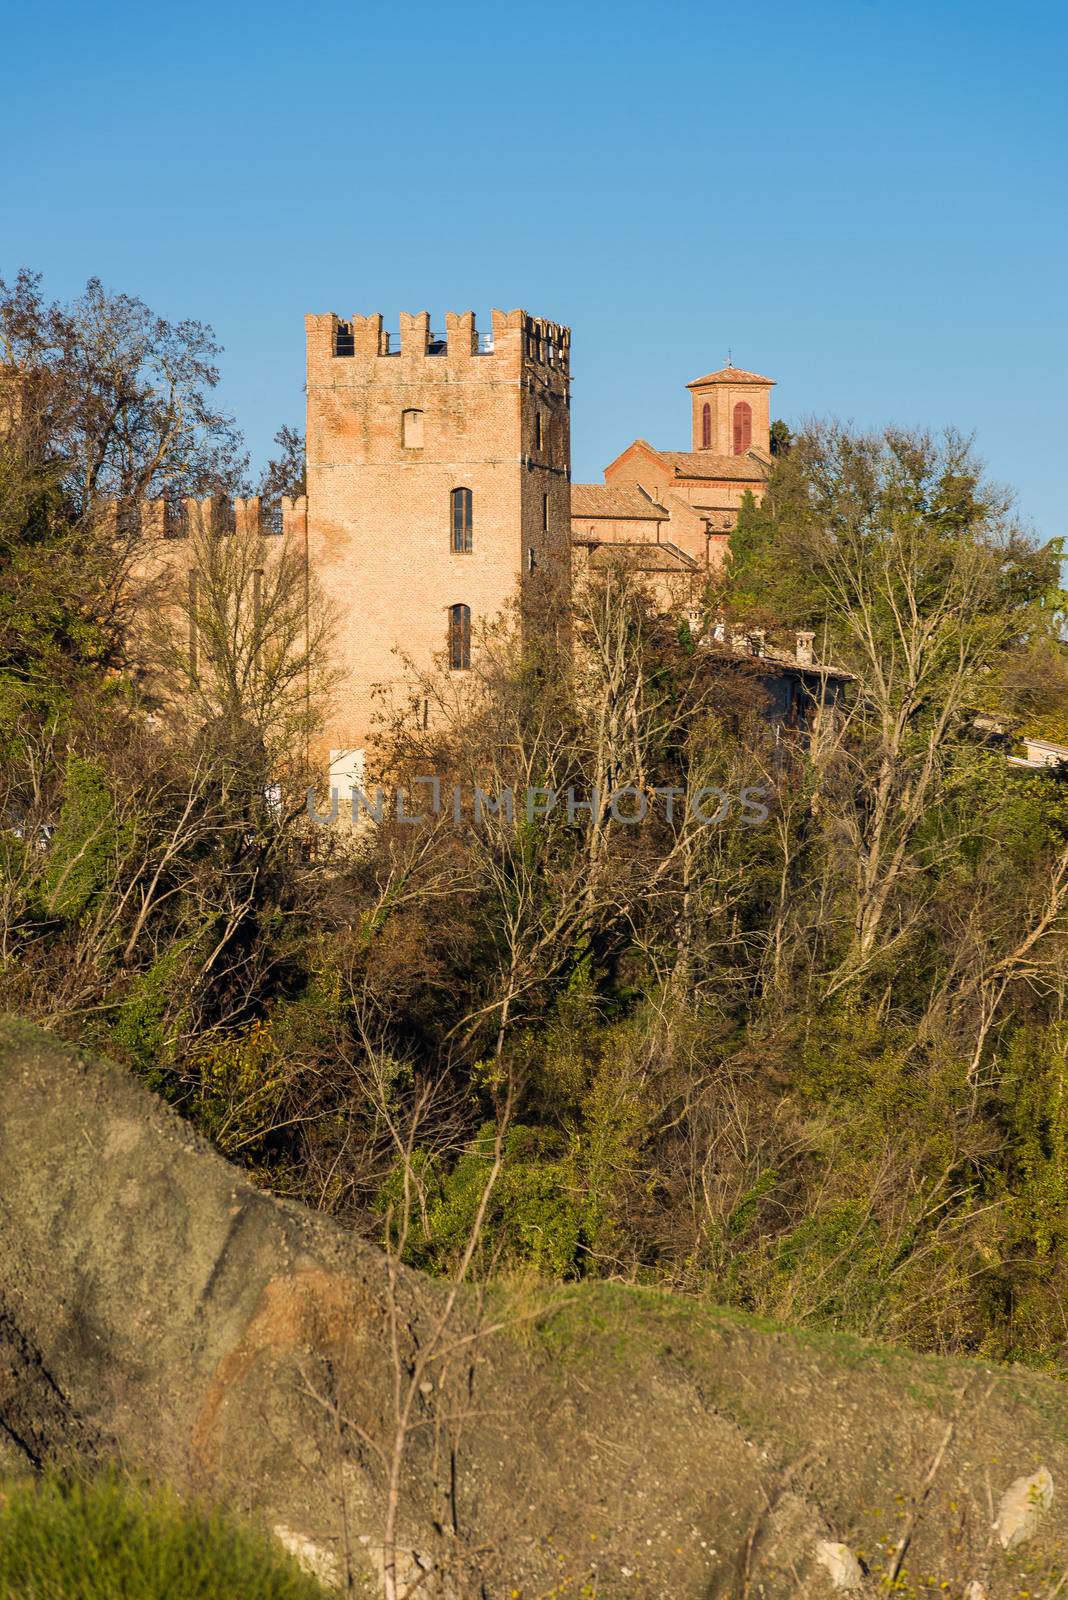 Tower of the fortification surrounding the ancient abbey of Monteveglio